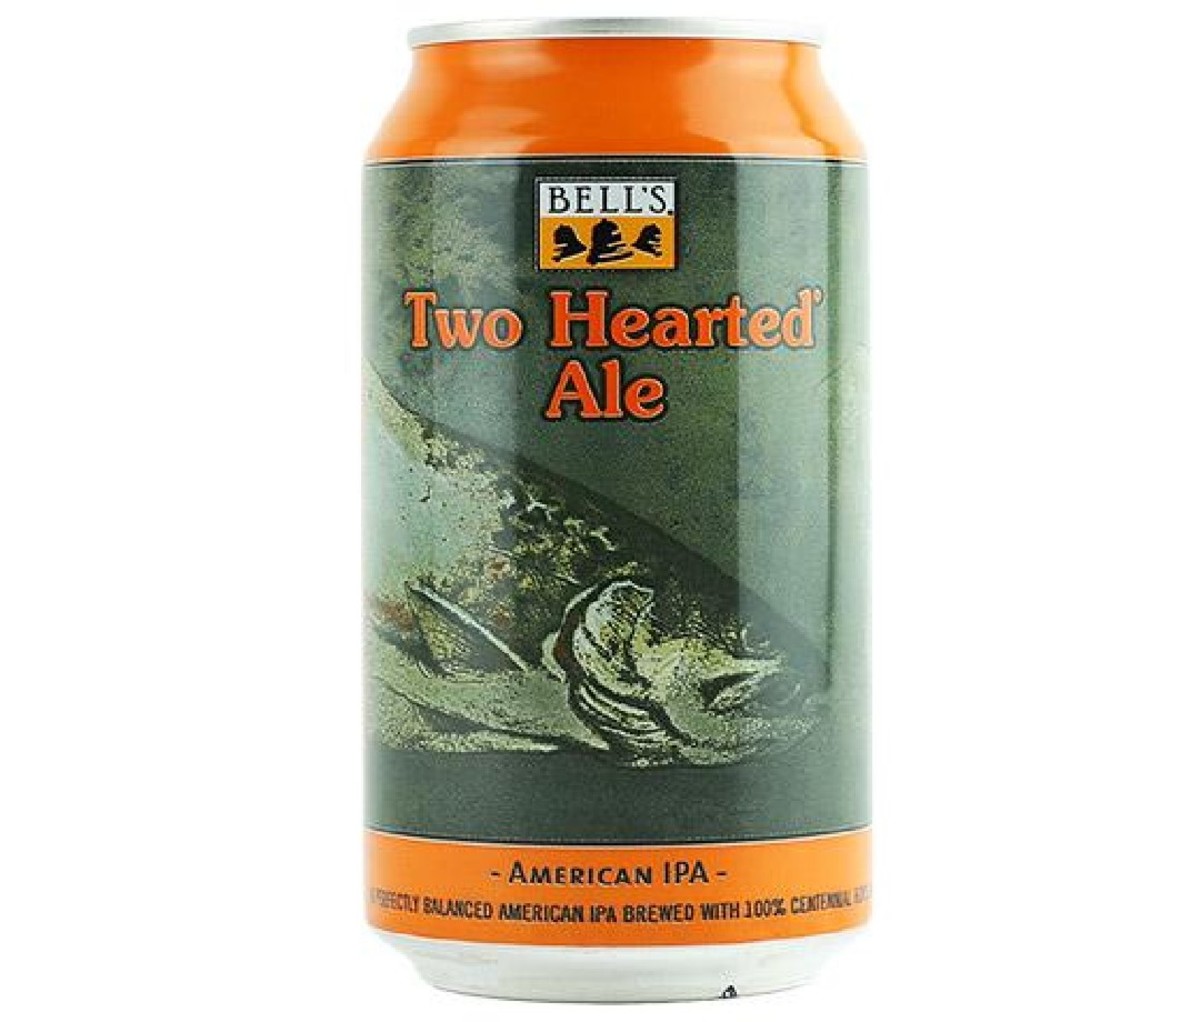 A orange and green can of Bell’s Brewery Two Hearted Ale.